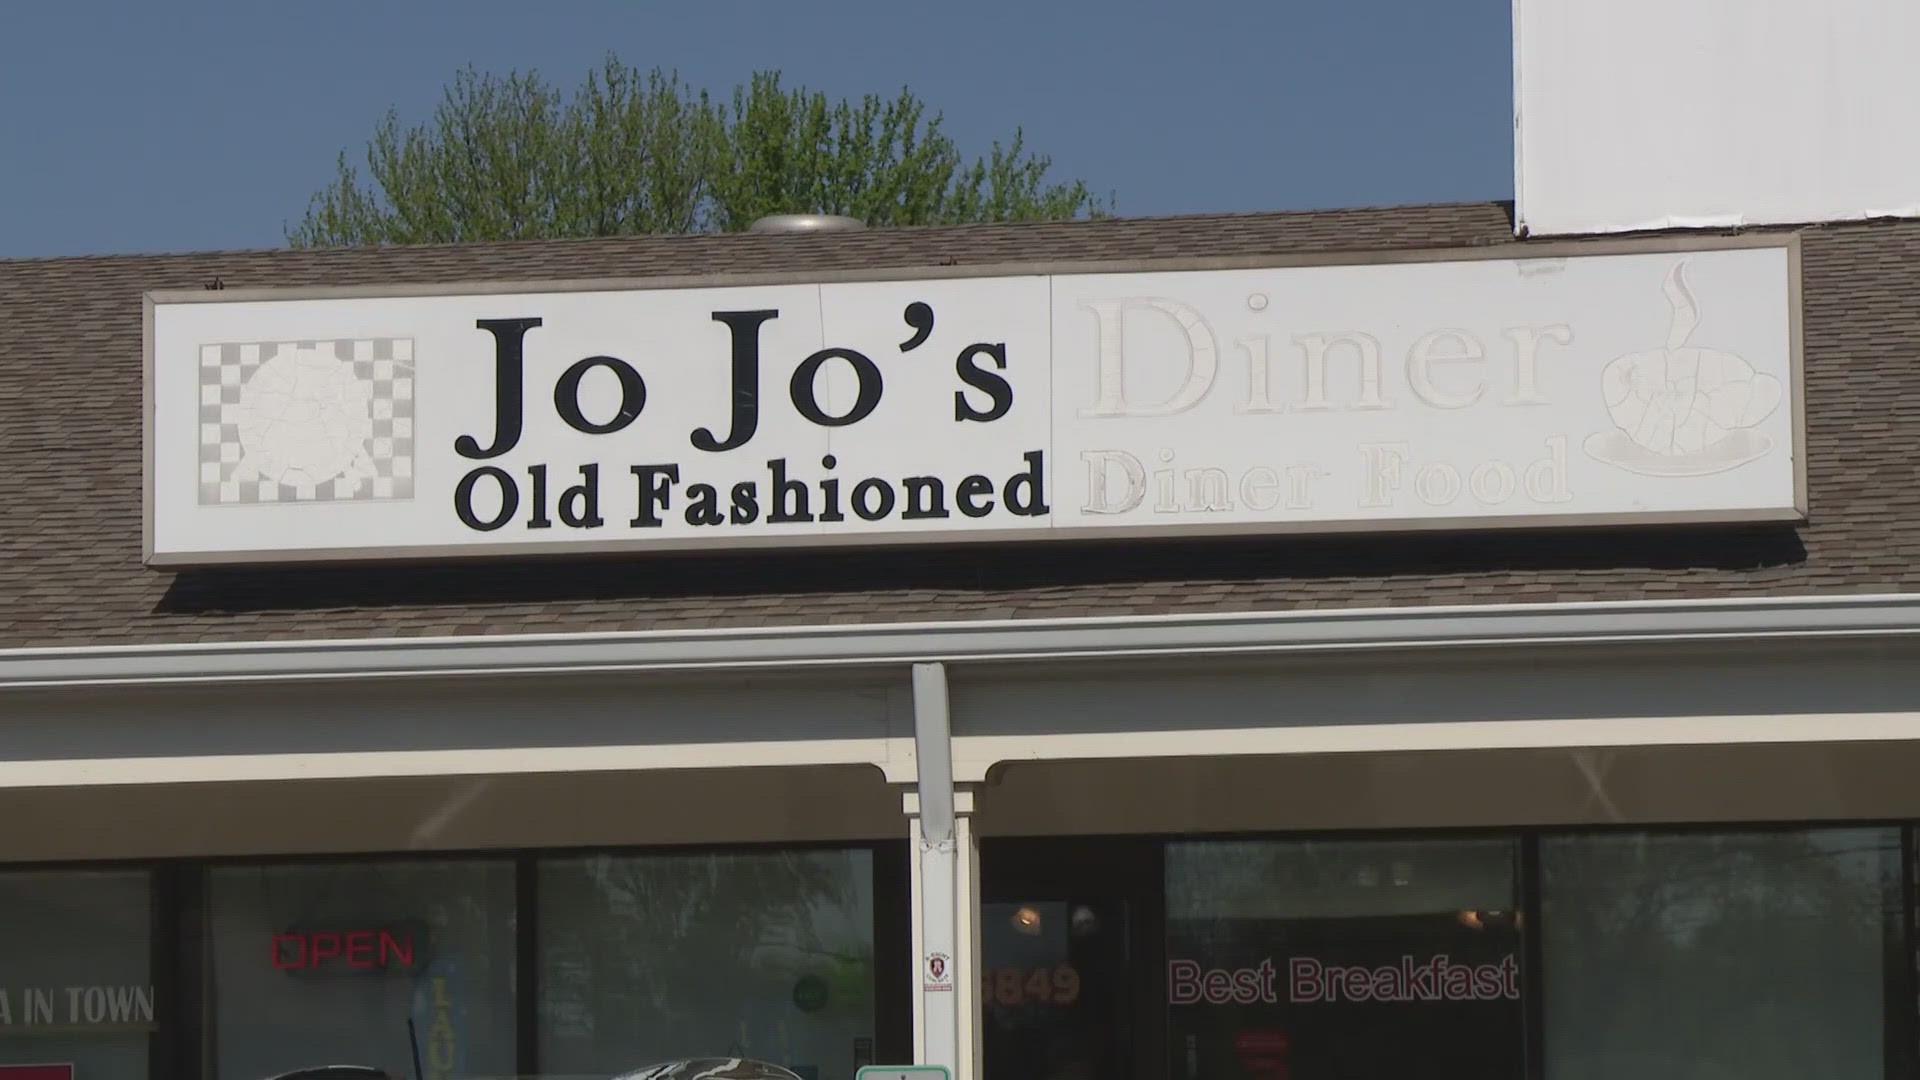 A neighboring business took to social media asking the community for help.